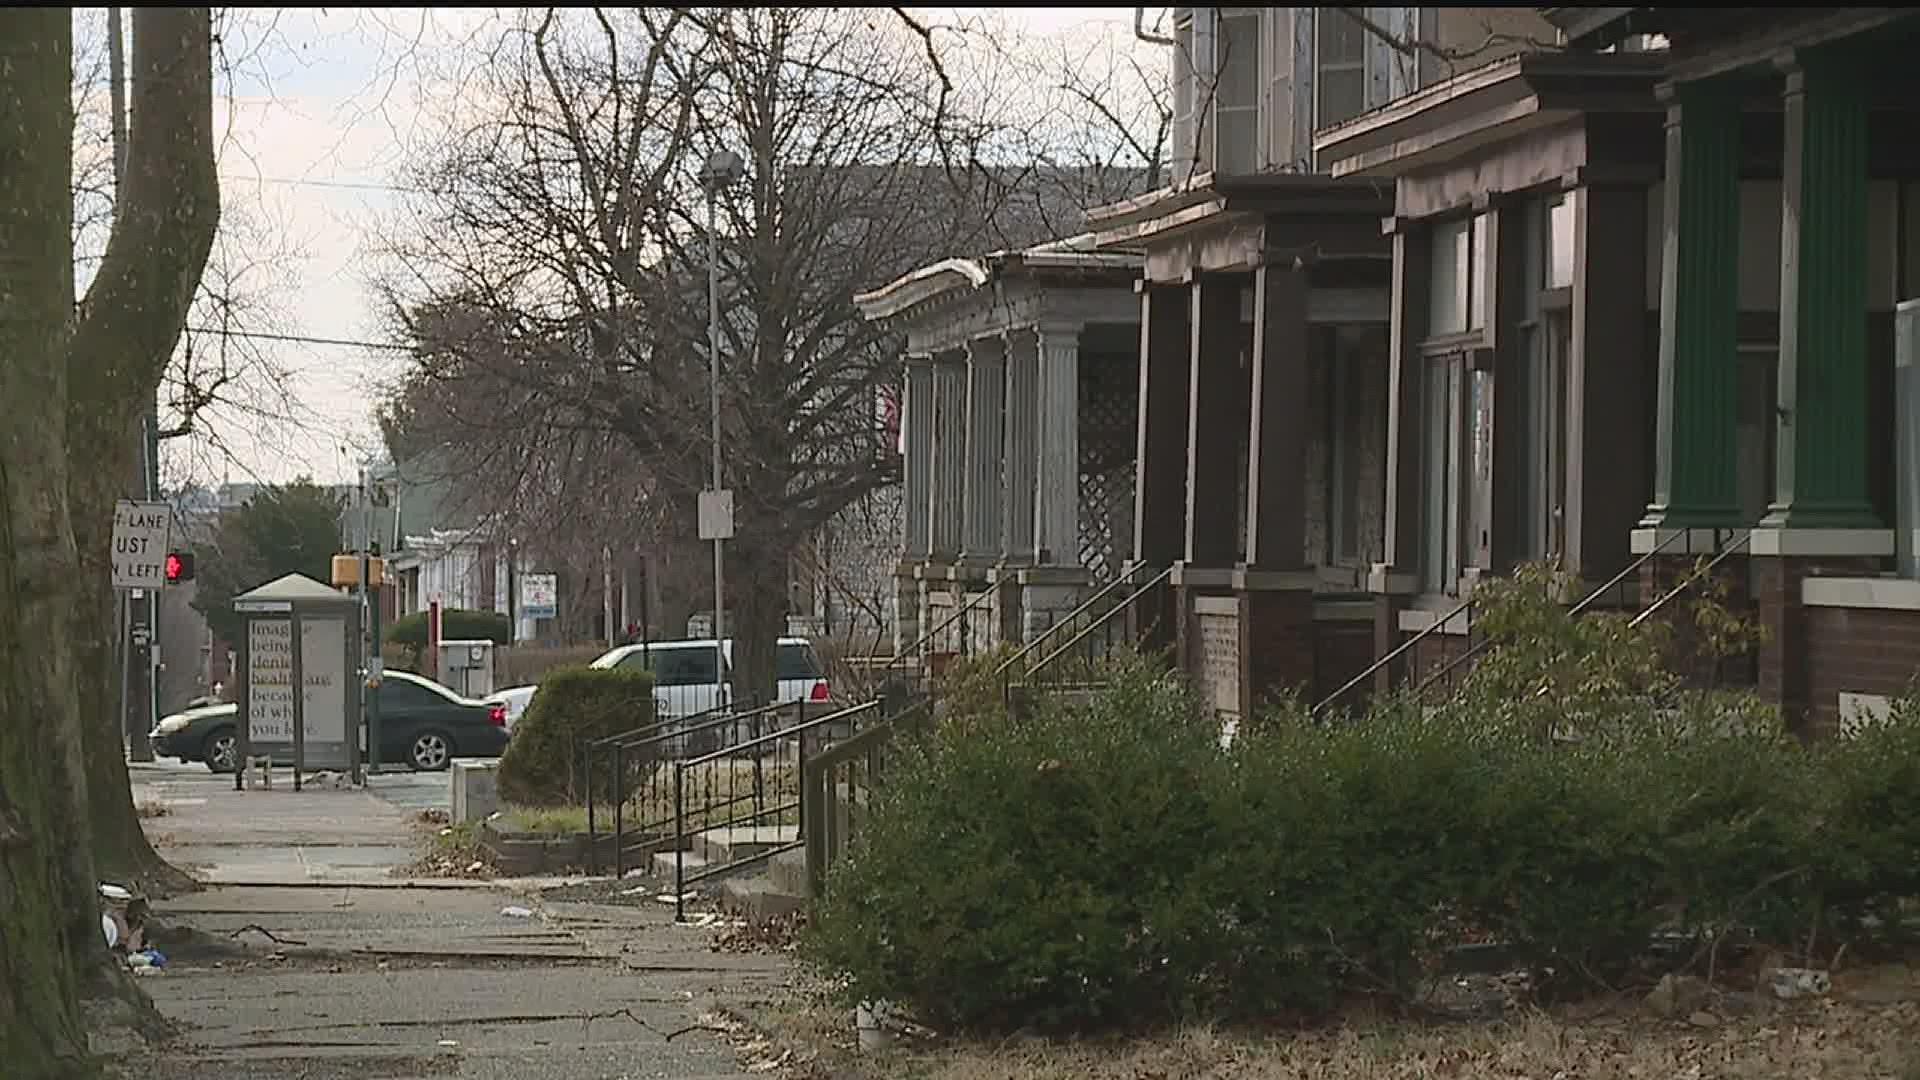 Bill introduced in the state house to shorten eviction process